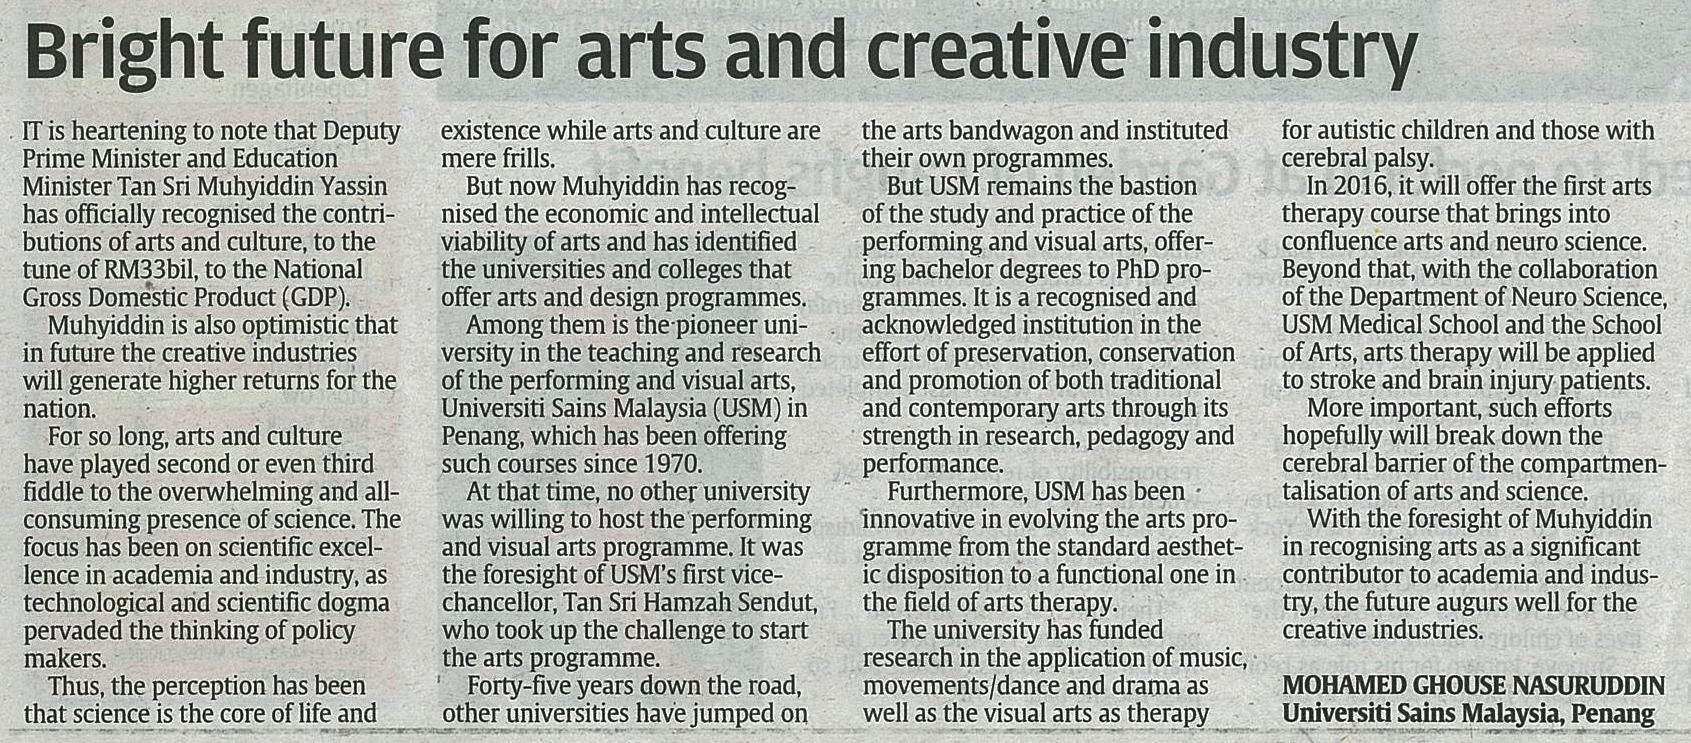 27 Mac 2015 Bright future for arts and creative industry The Star